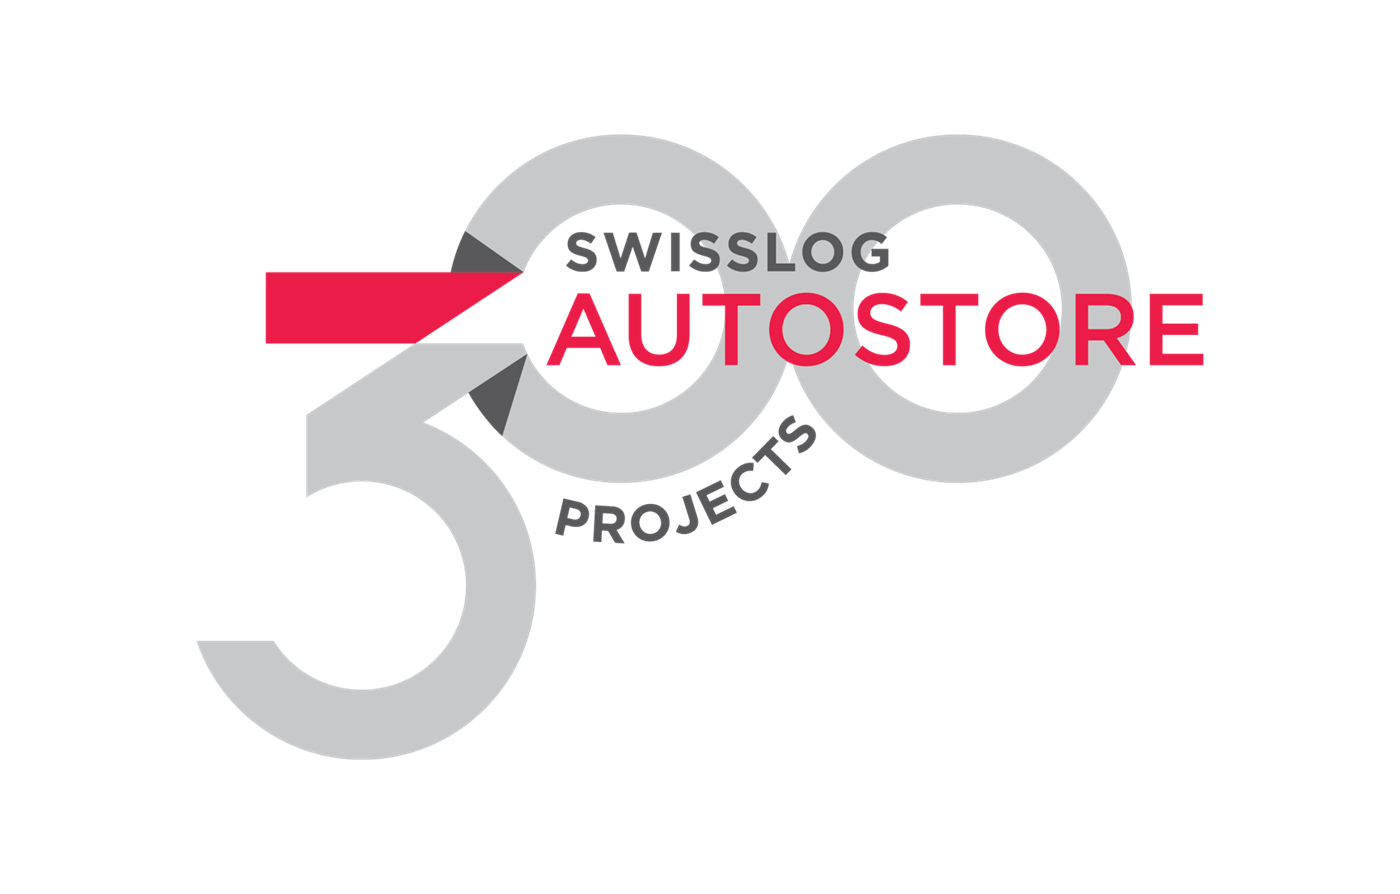 Over 300 AutoStore Projects Deployed by Swisslog